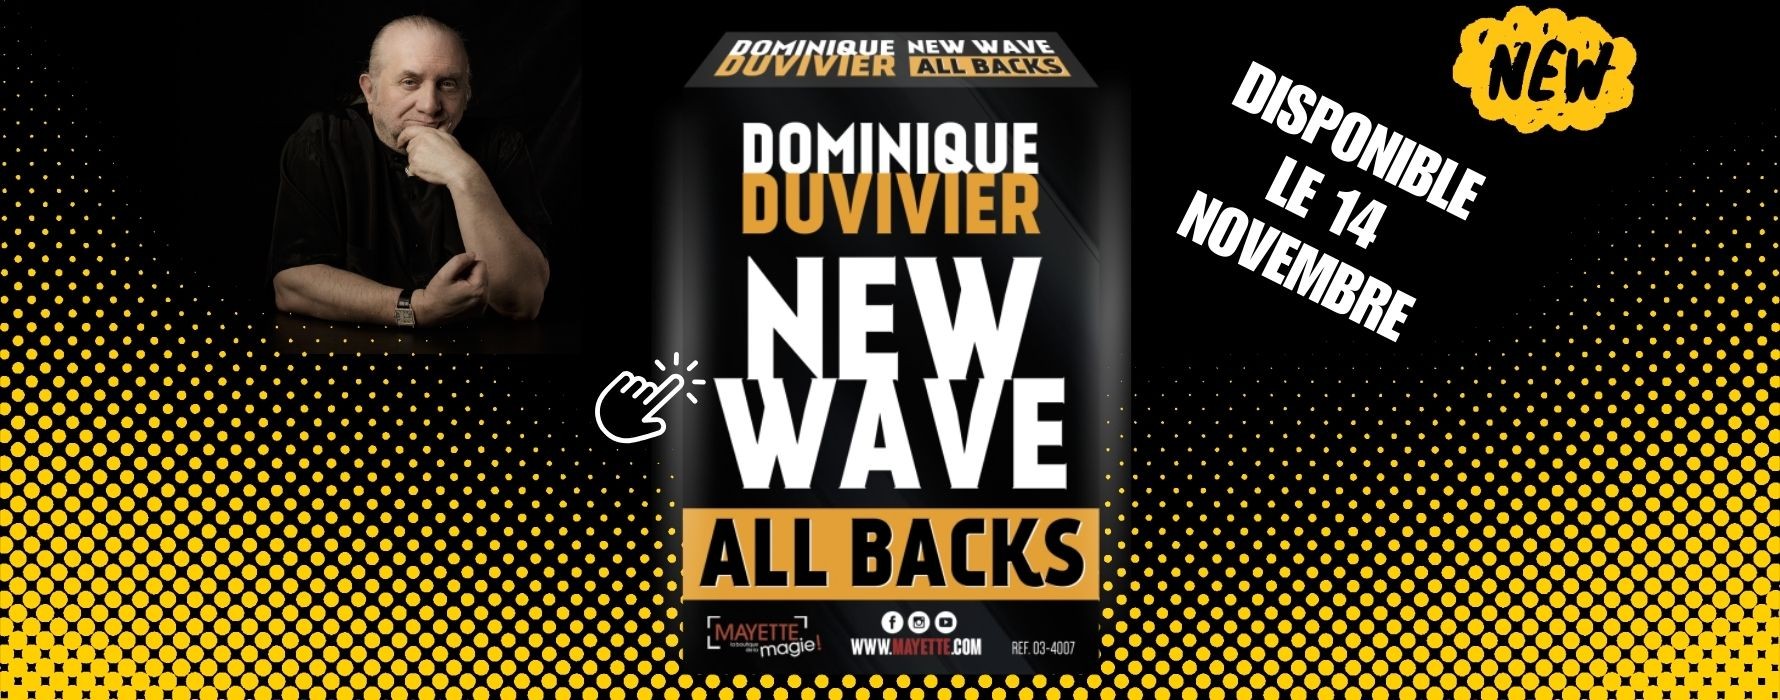 NEW WAVE ALL BACKS